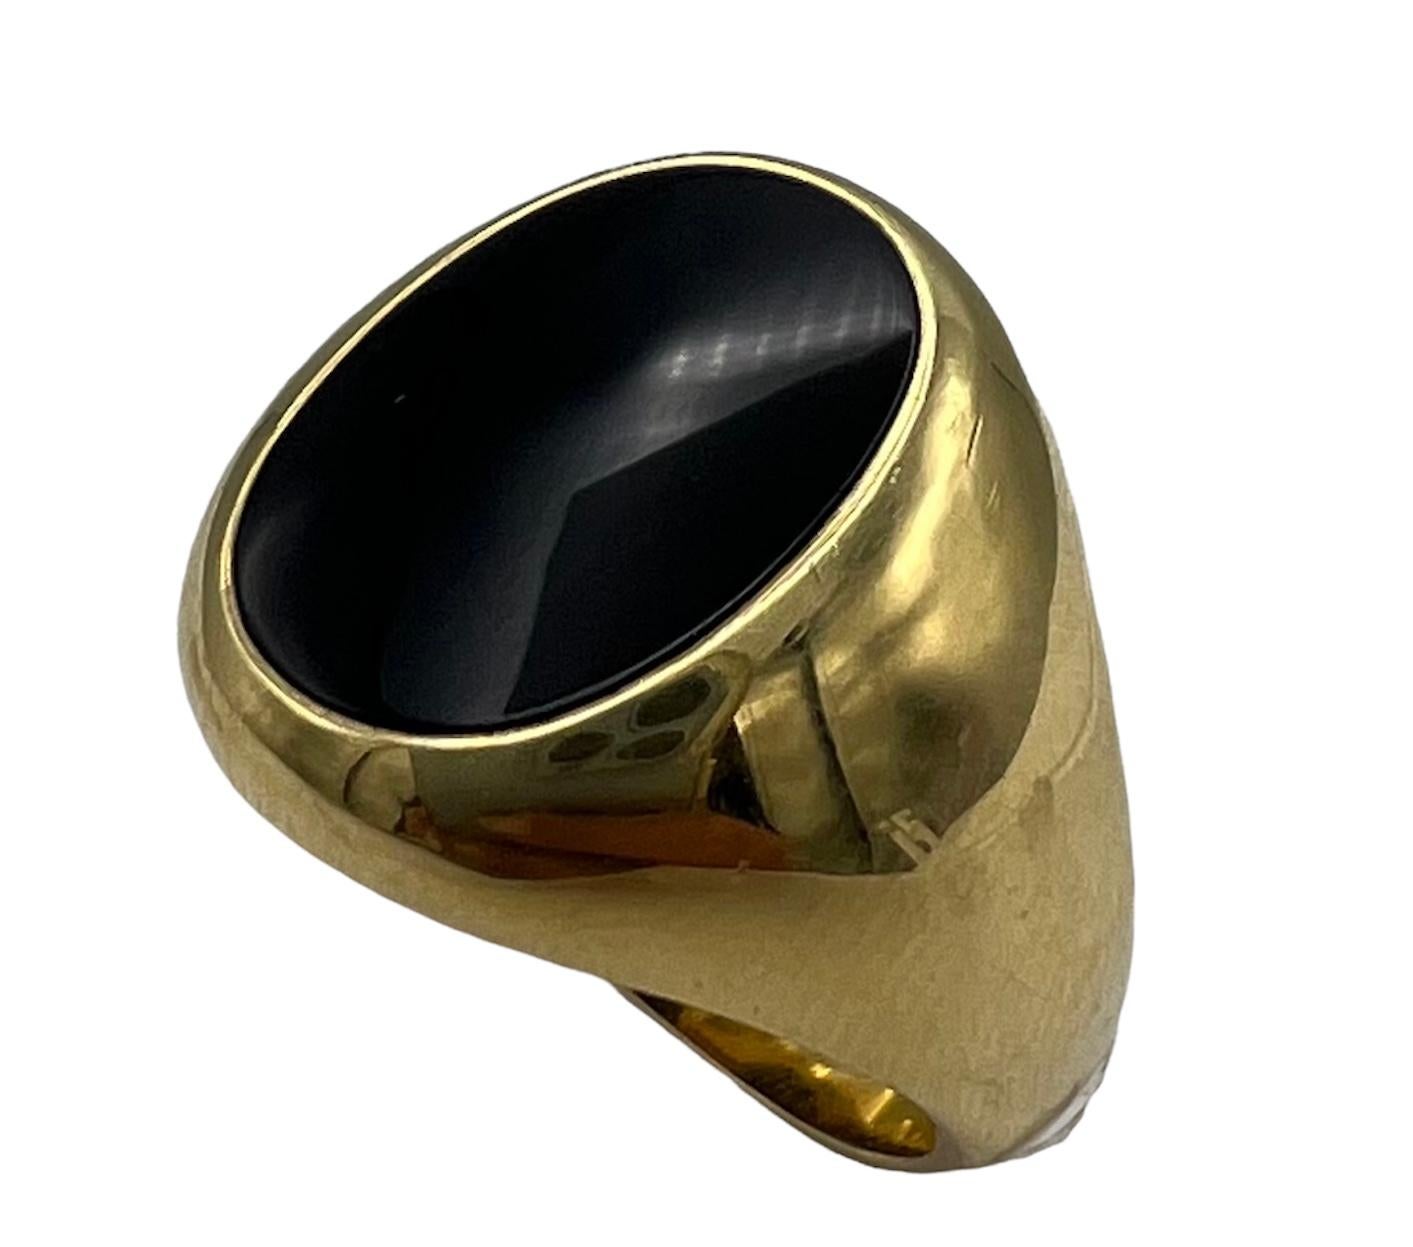 ​A Tiffany & Co. Onyx Gold Signet Ring in 18k yellow gold, circa 1950s. This neat, minimalistic ring was made with a perfect scale in mind. It seats well on a finger and makes a great solo ring, as well as a part of the ring stack.
​Like everything